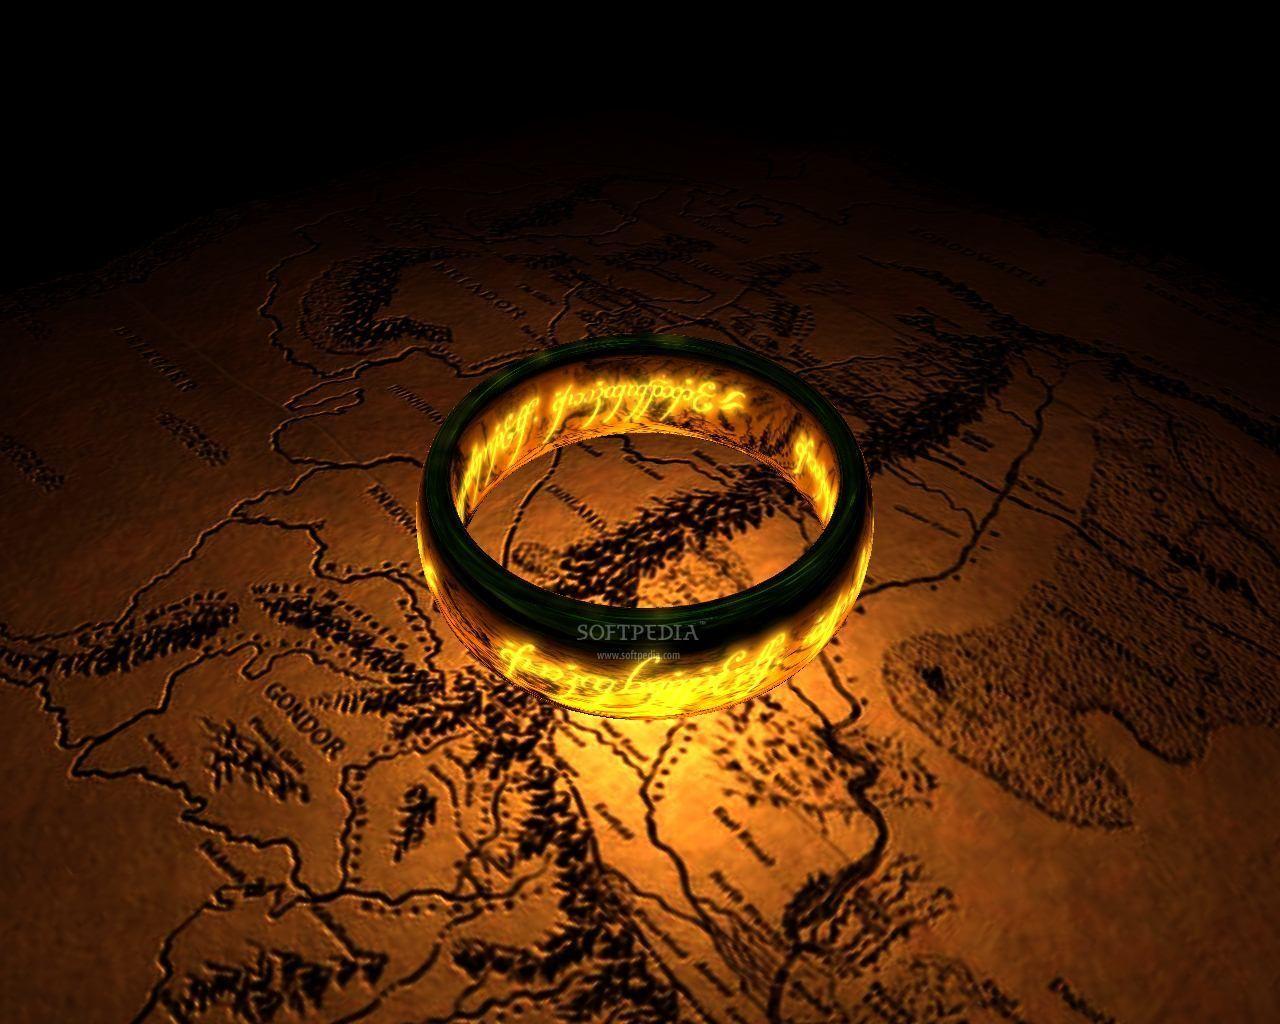 Lord Of The Rings IPhone Wallpaper. Image